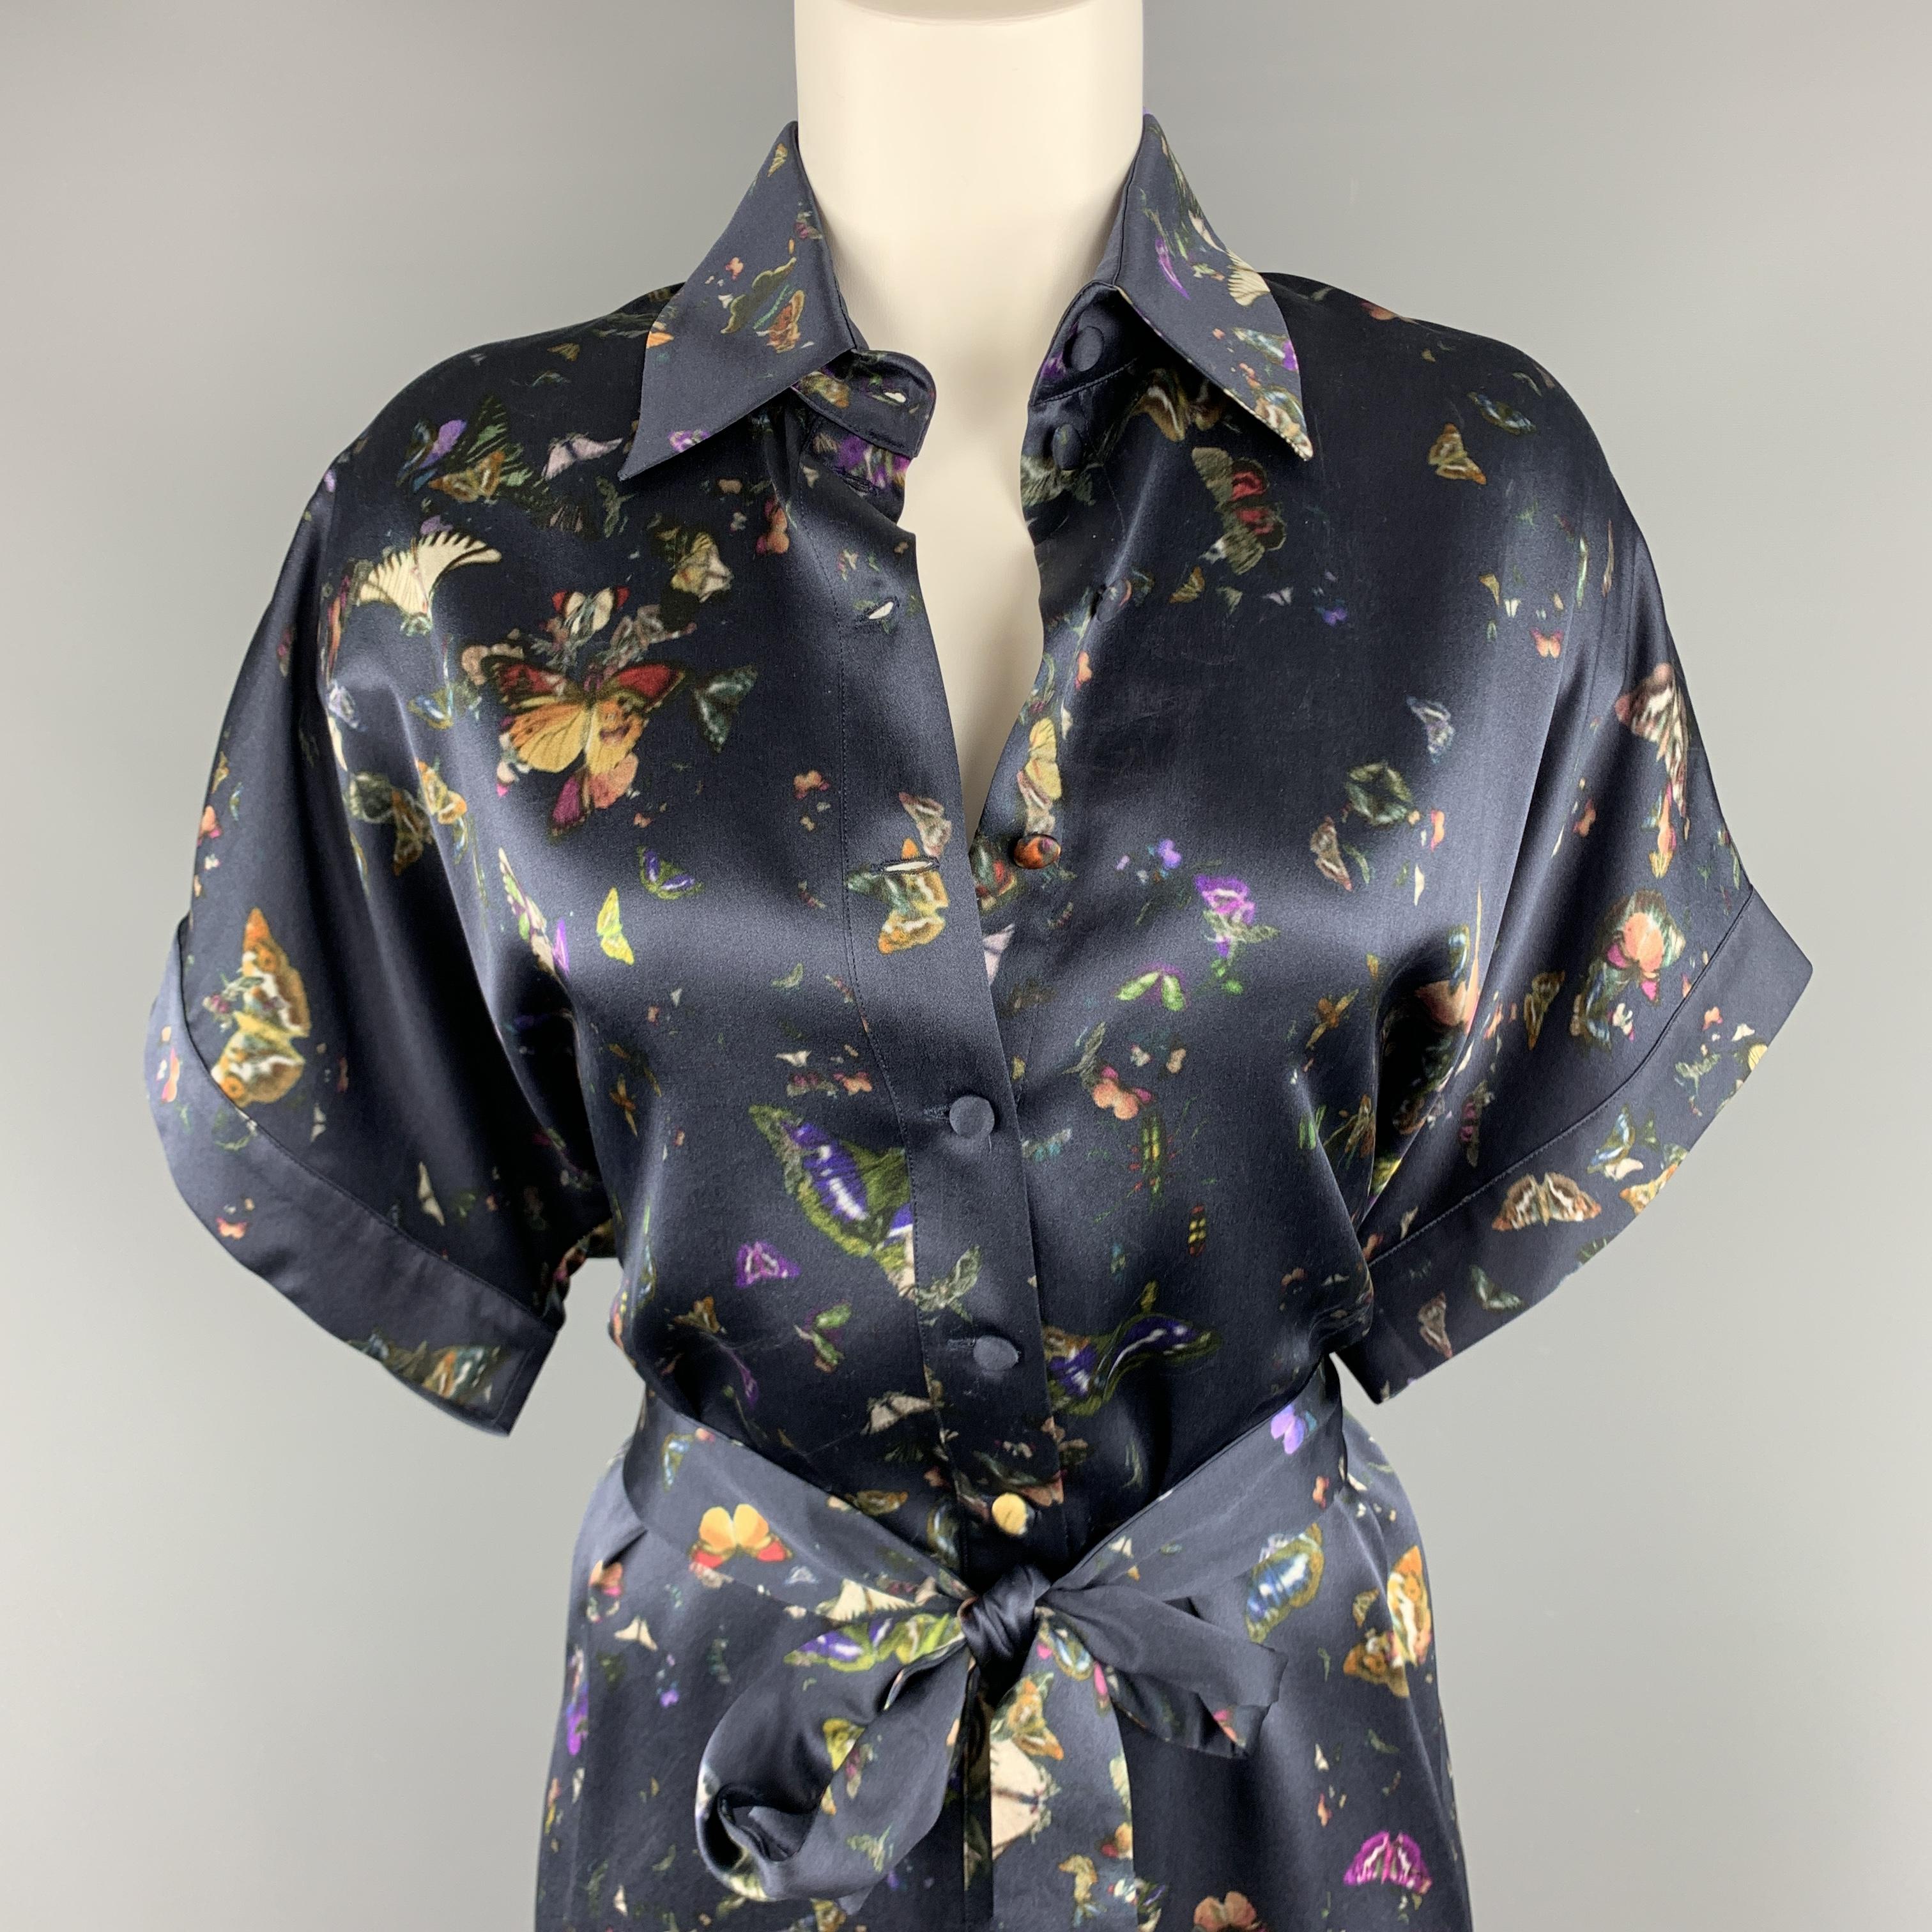 ERDEM shirt dress comes in navy blue silk satin with an all over butterflies print, pointed collar, drop shoulder short sleeves, button up front, and tied belt waist. Made in Italy.

Excellent Pre-Owned Condition.
Marked: 8

Measurements:

Bust: 44